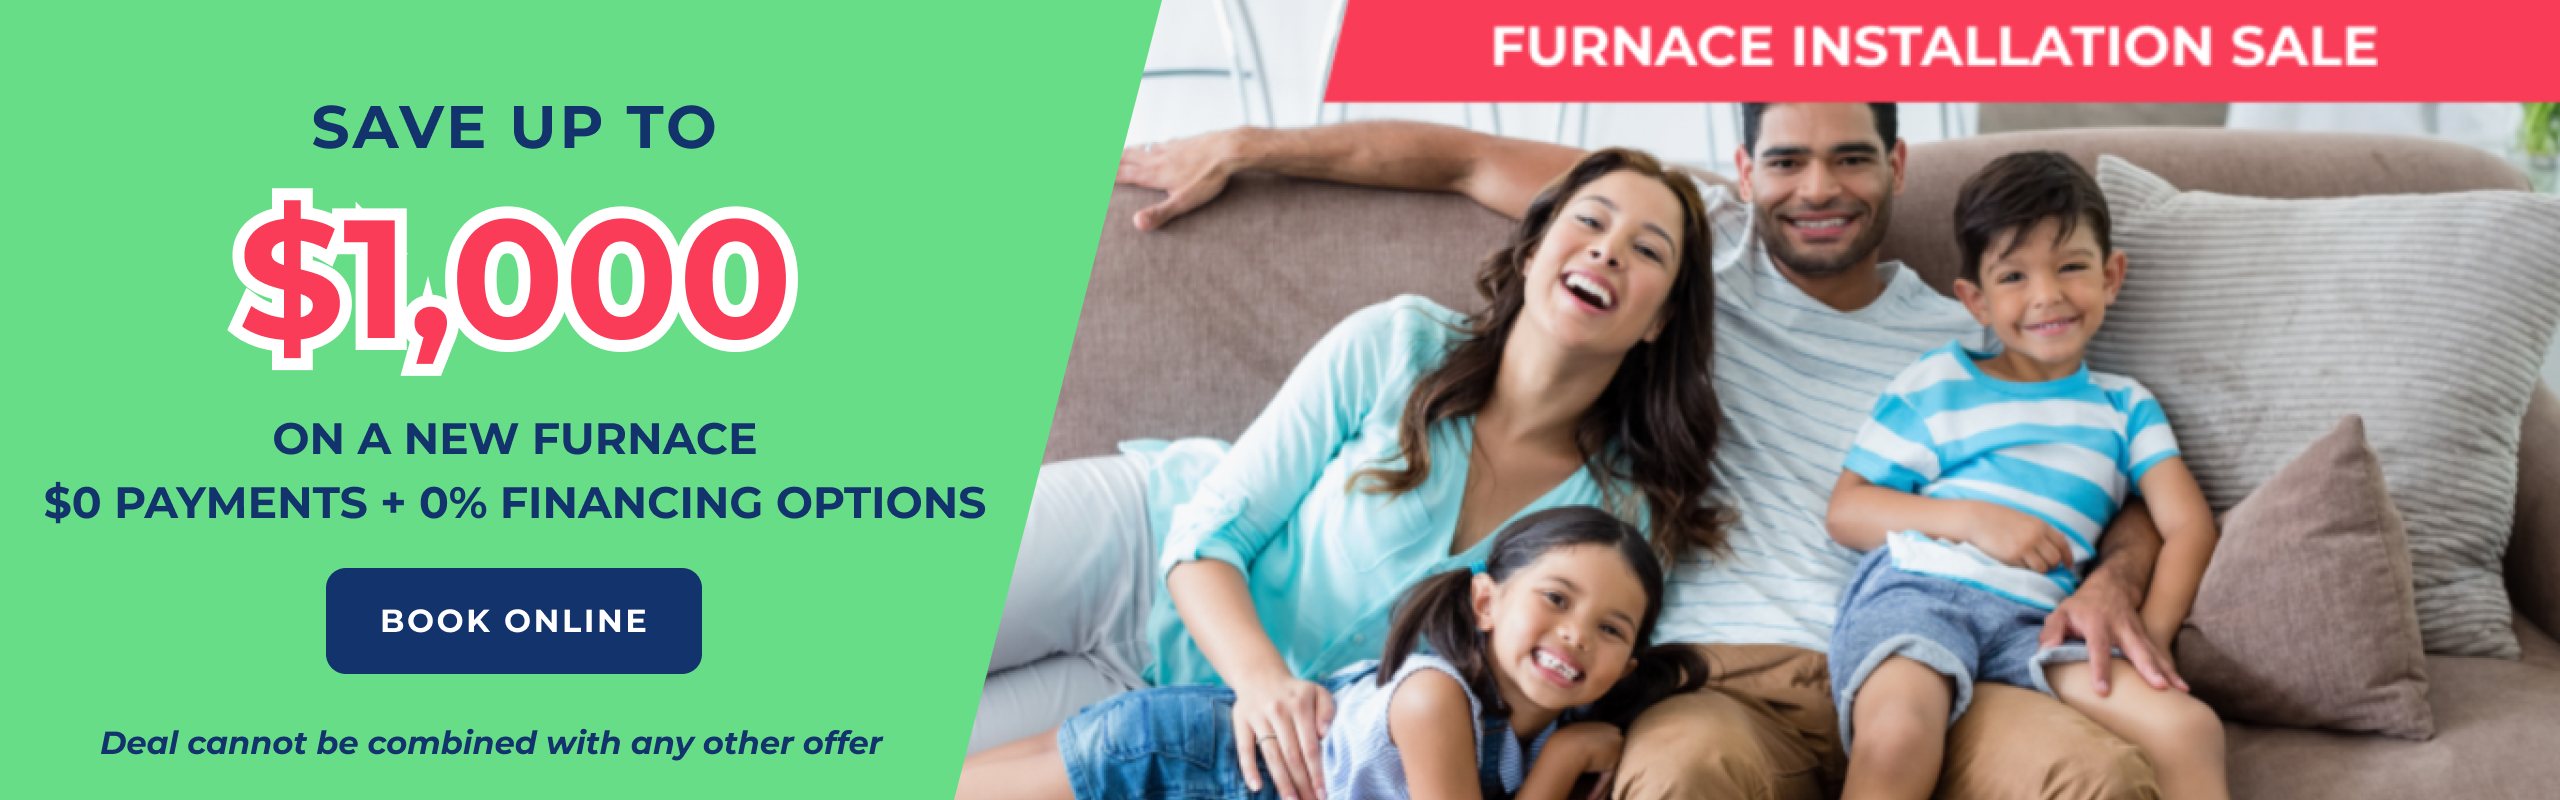 Furnace Installation in Mississauga: Save up to $1000 on a new furnace